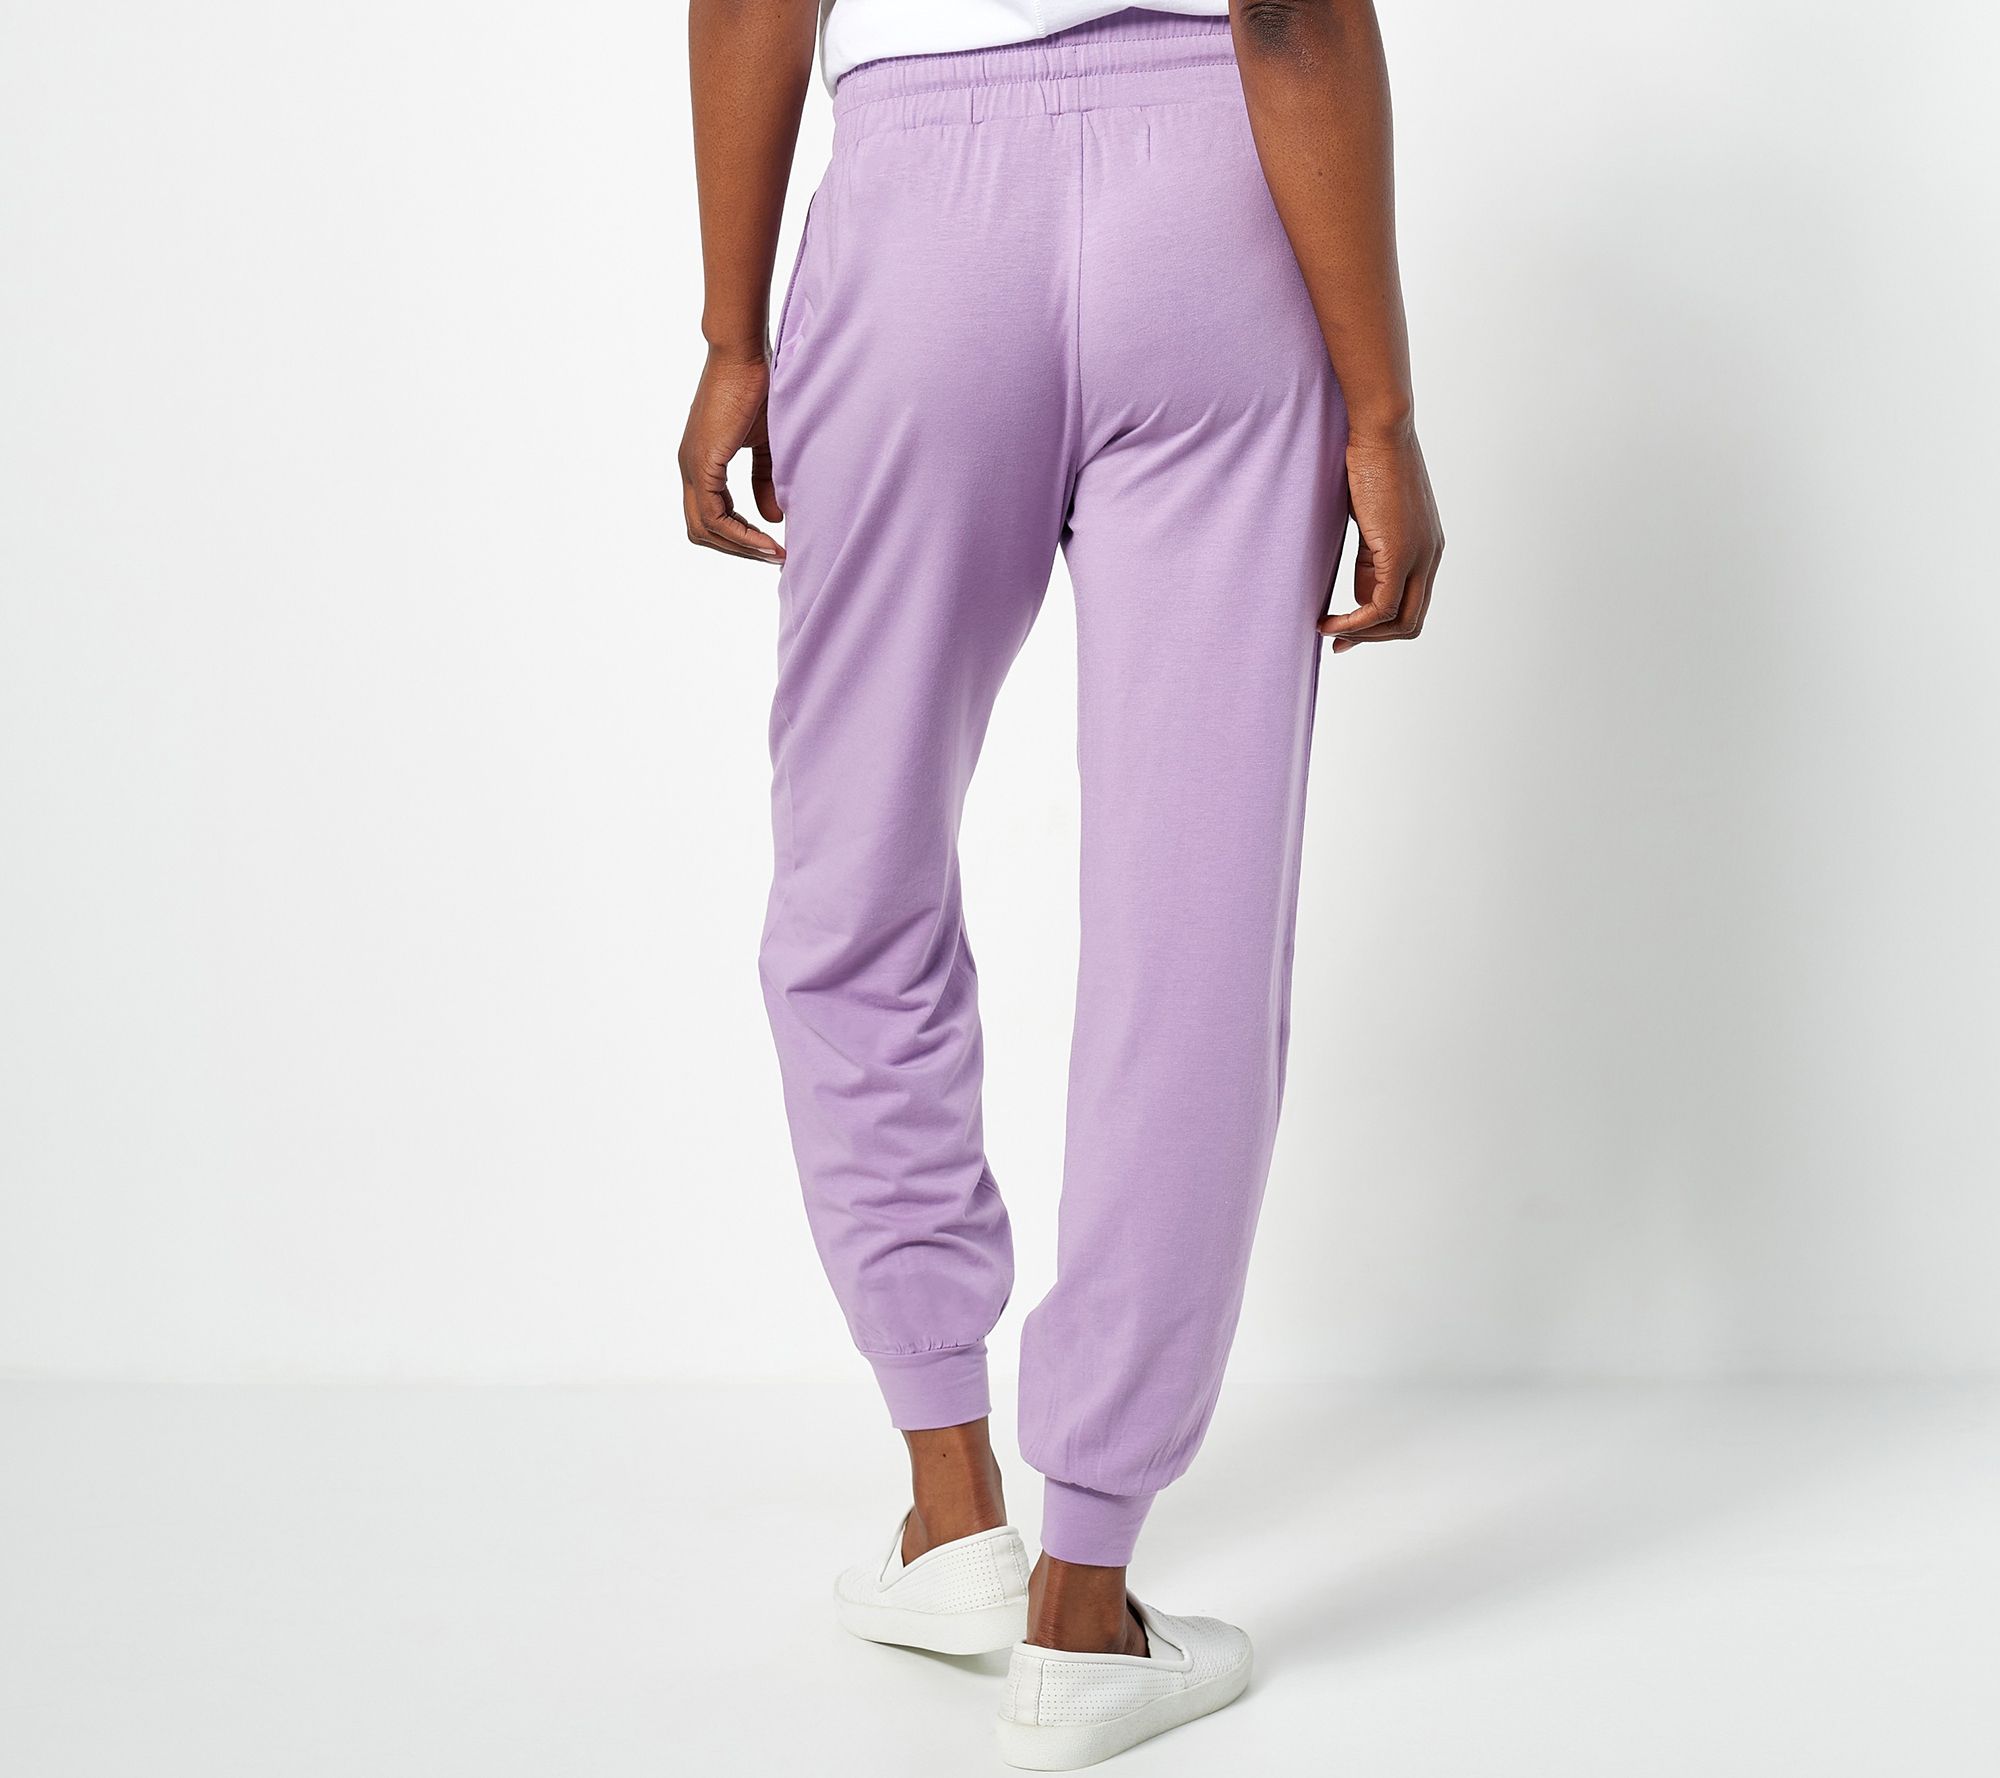 AnyBody Tall Cozy Knit Luxe Jogger Pant - QVC.com